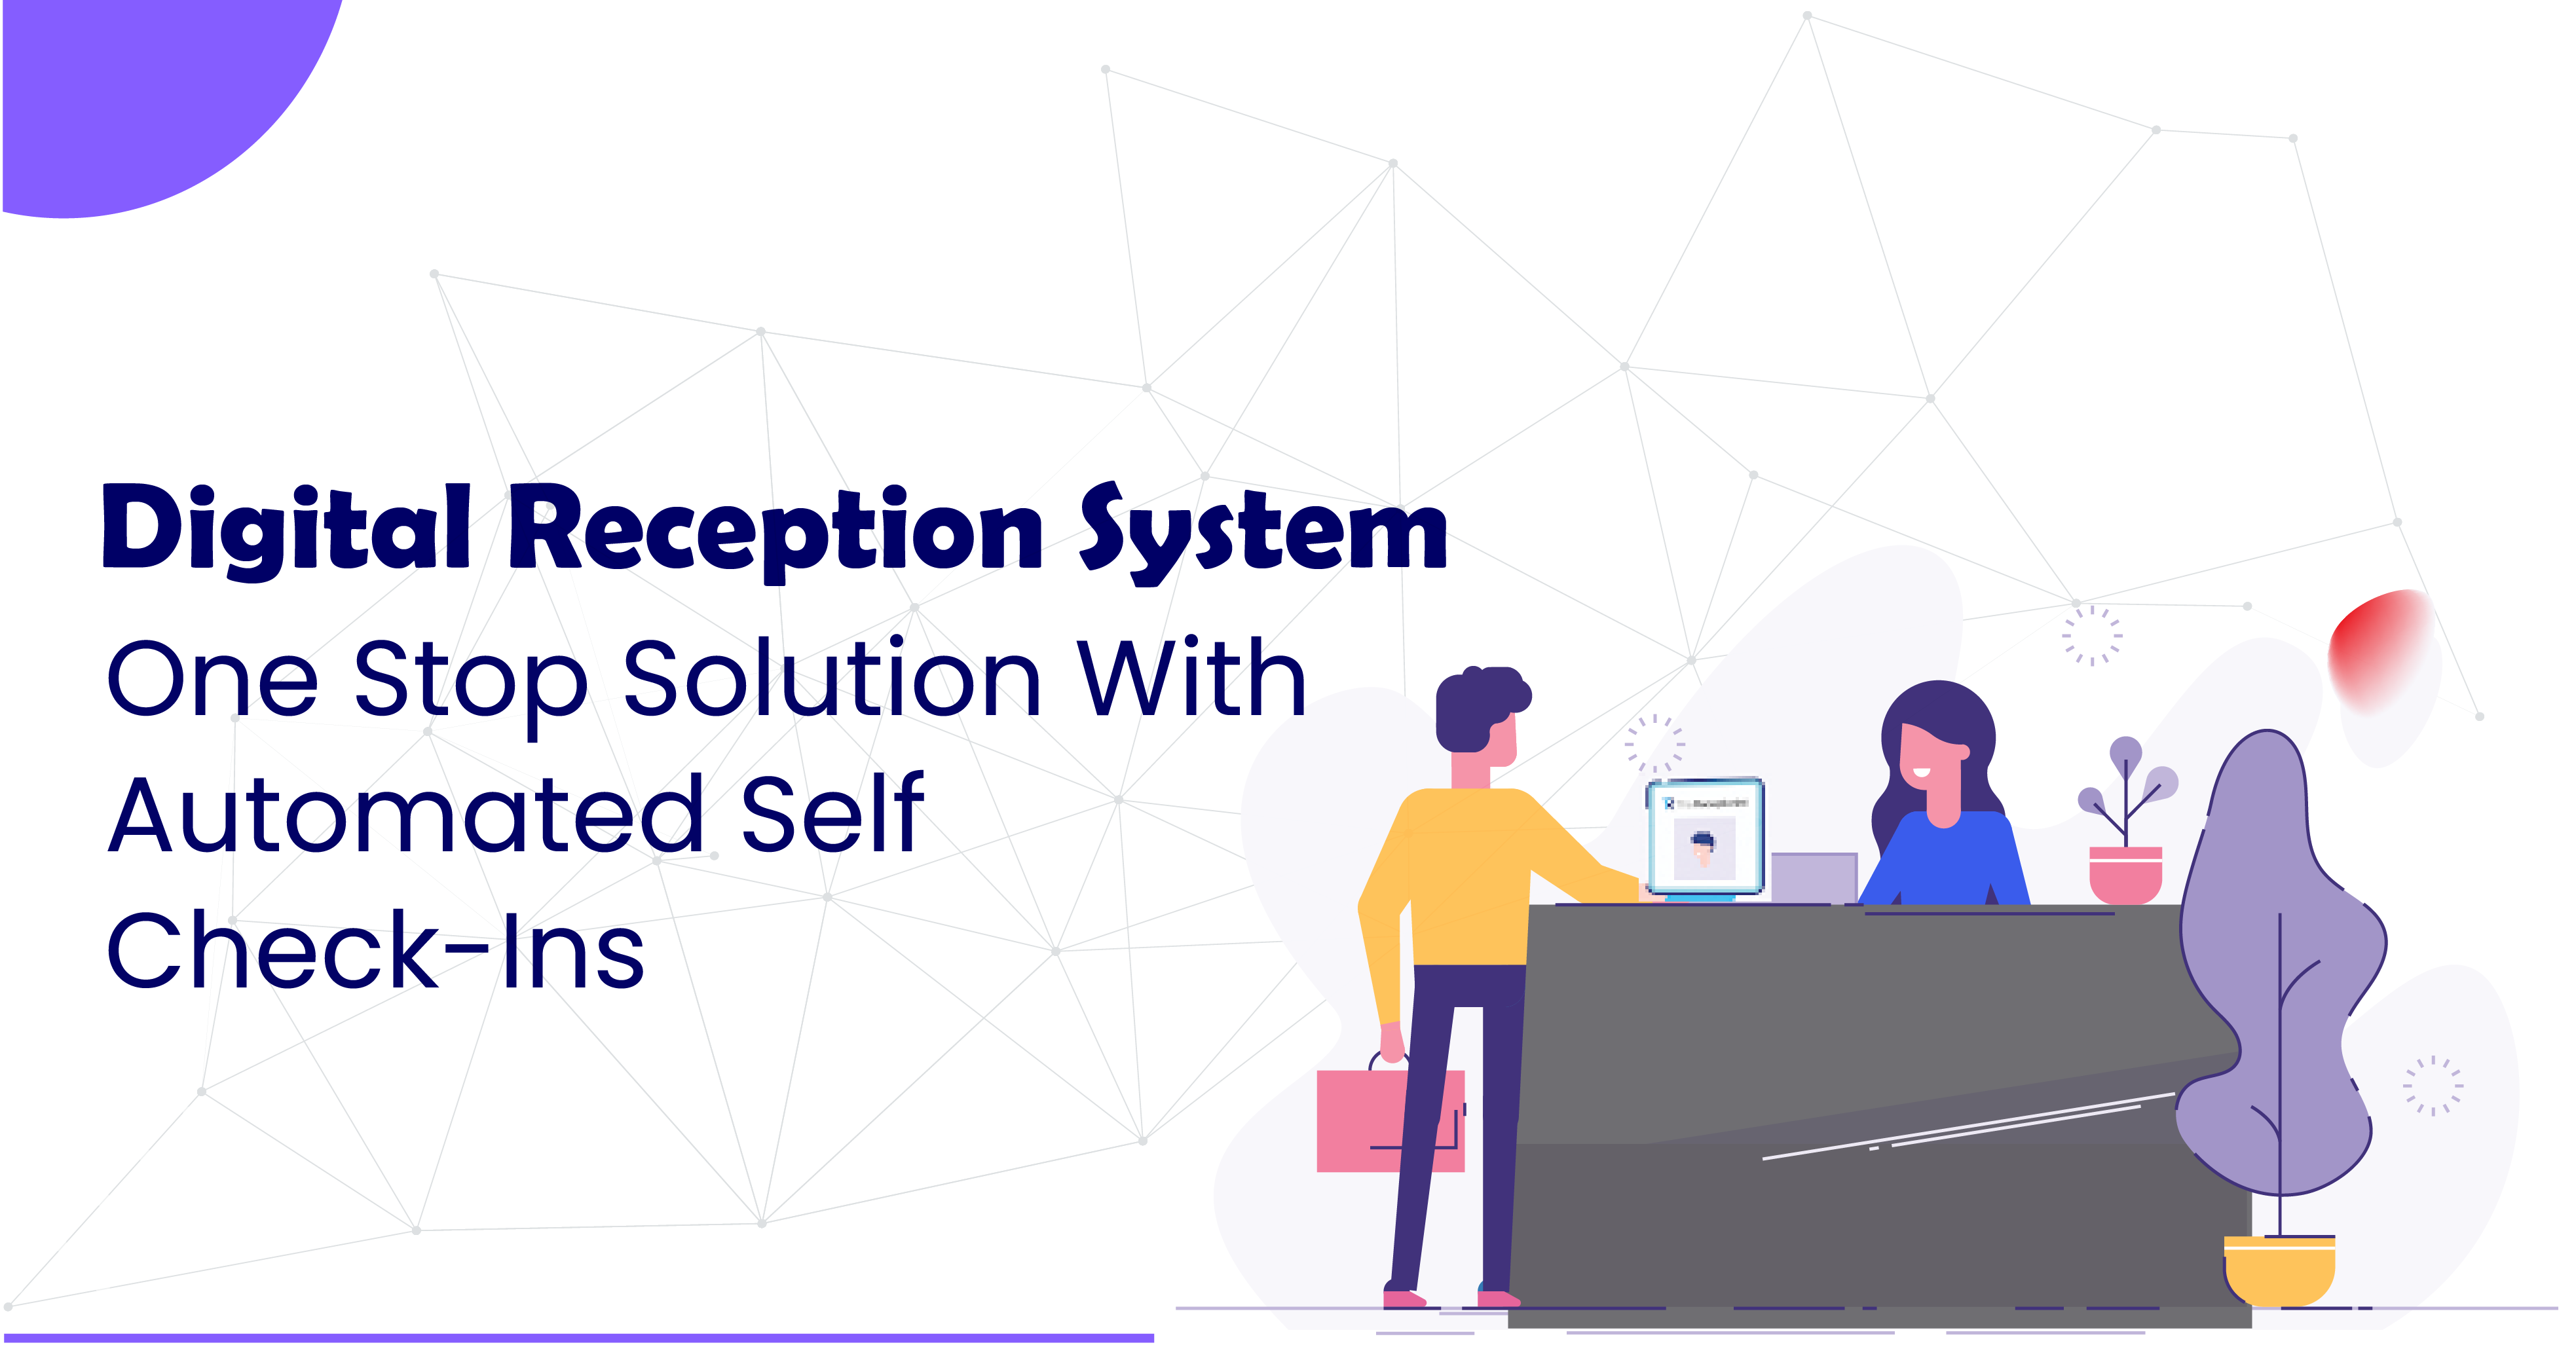 Digital Reception System: One Stop solution With Automated Self Check-ins